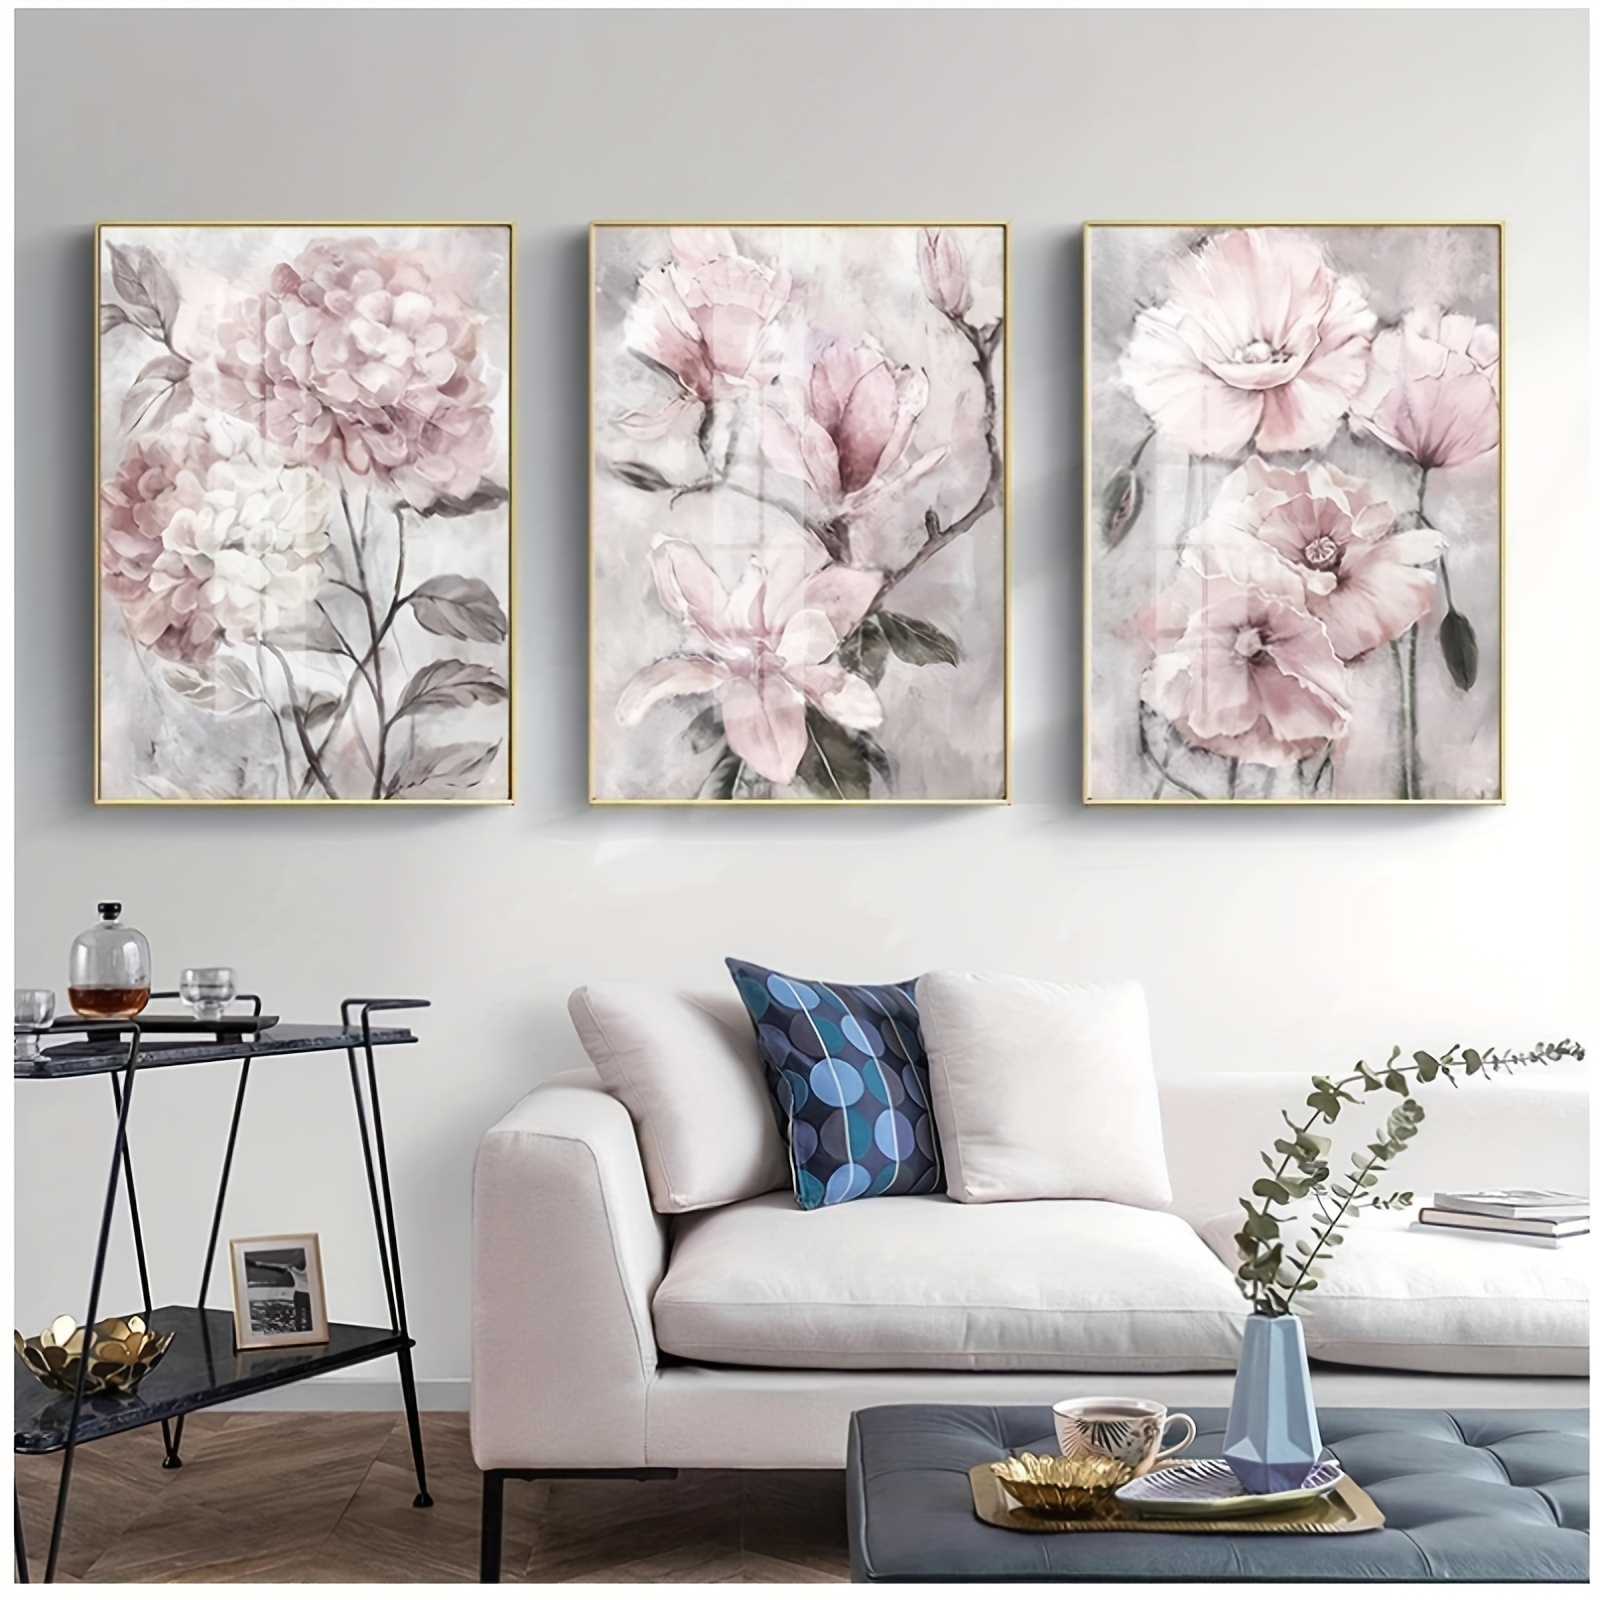 Smile Flower Poster Vintage Posters Retro Aesthetic Room Decor Poster  Decorative Painting Canvas Wall Art Living Room Posters Bedroom Painting